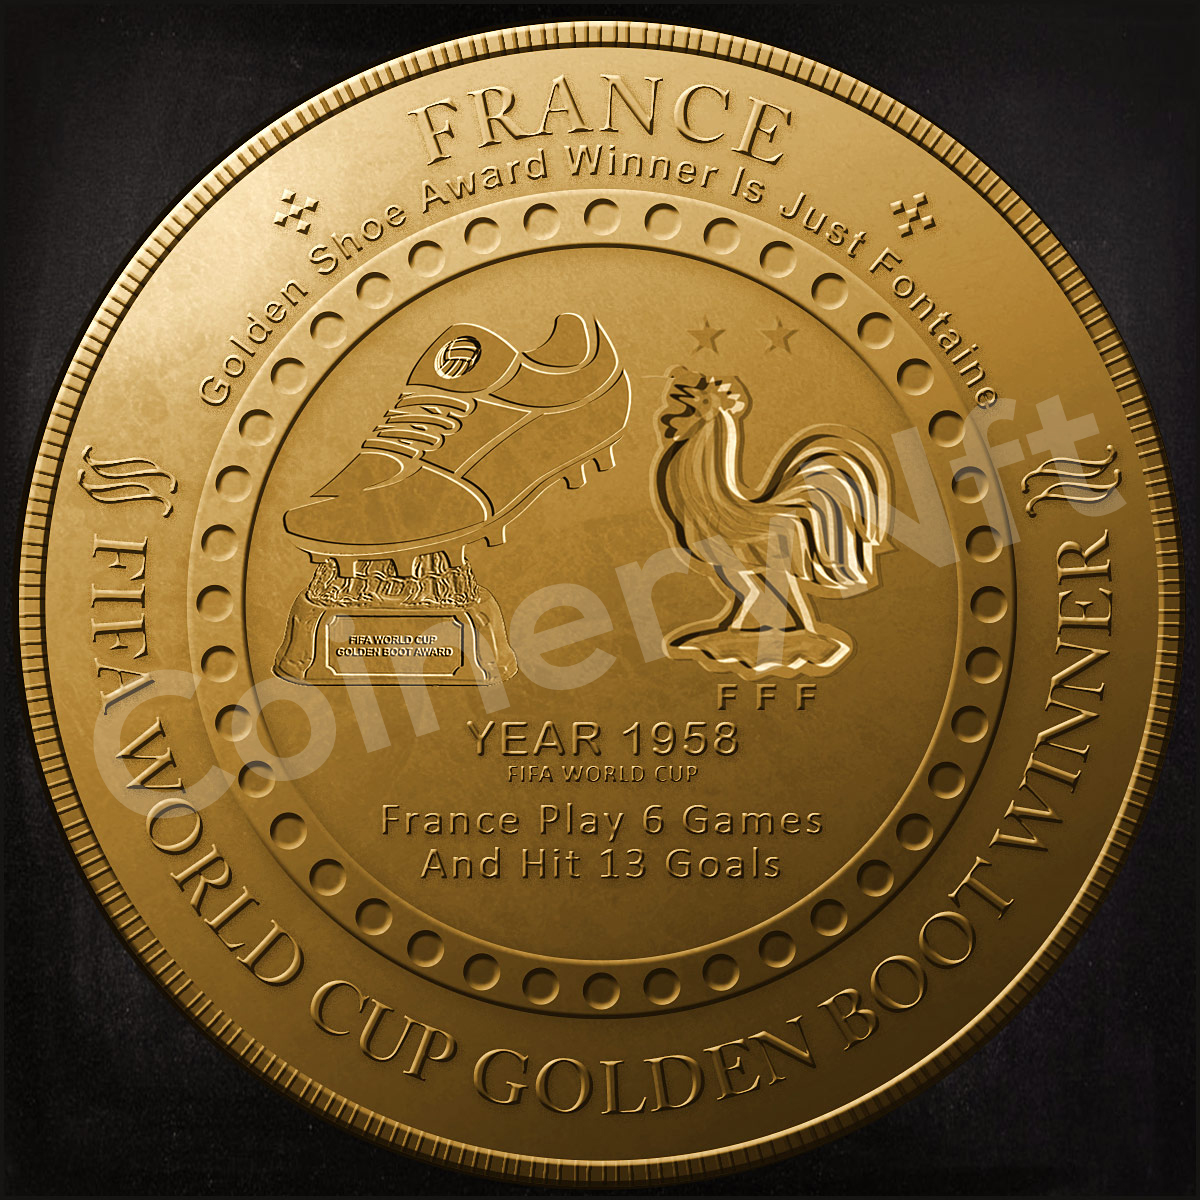 FIFA World Cup Golden Boot Winner 1958, was won by Just Fontaine (France). There is an NFT coin made in memory of this event. @opensea @FIFAWorldCup @fifamedia @FIFAcom #nftcommunity #nftcollector #nftinvestor #nftnews #nftmagazine #nftbuyers #NFTshills #nftgame #cryptonews #NFT